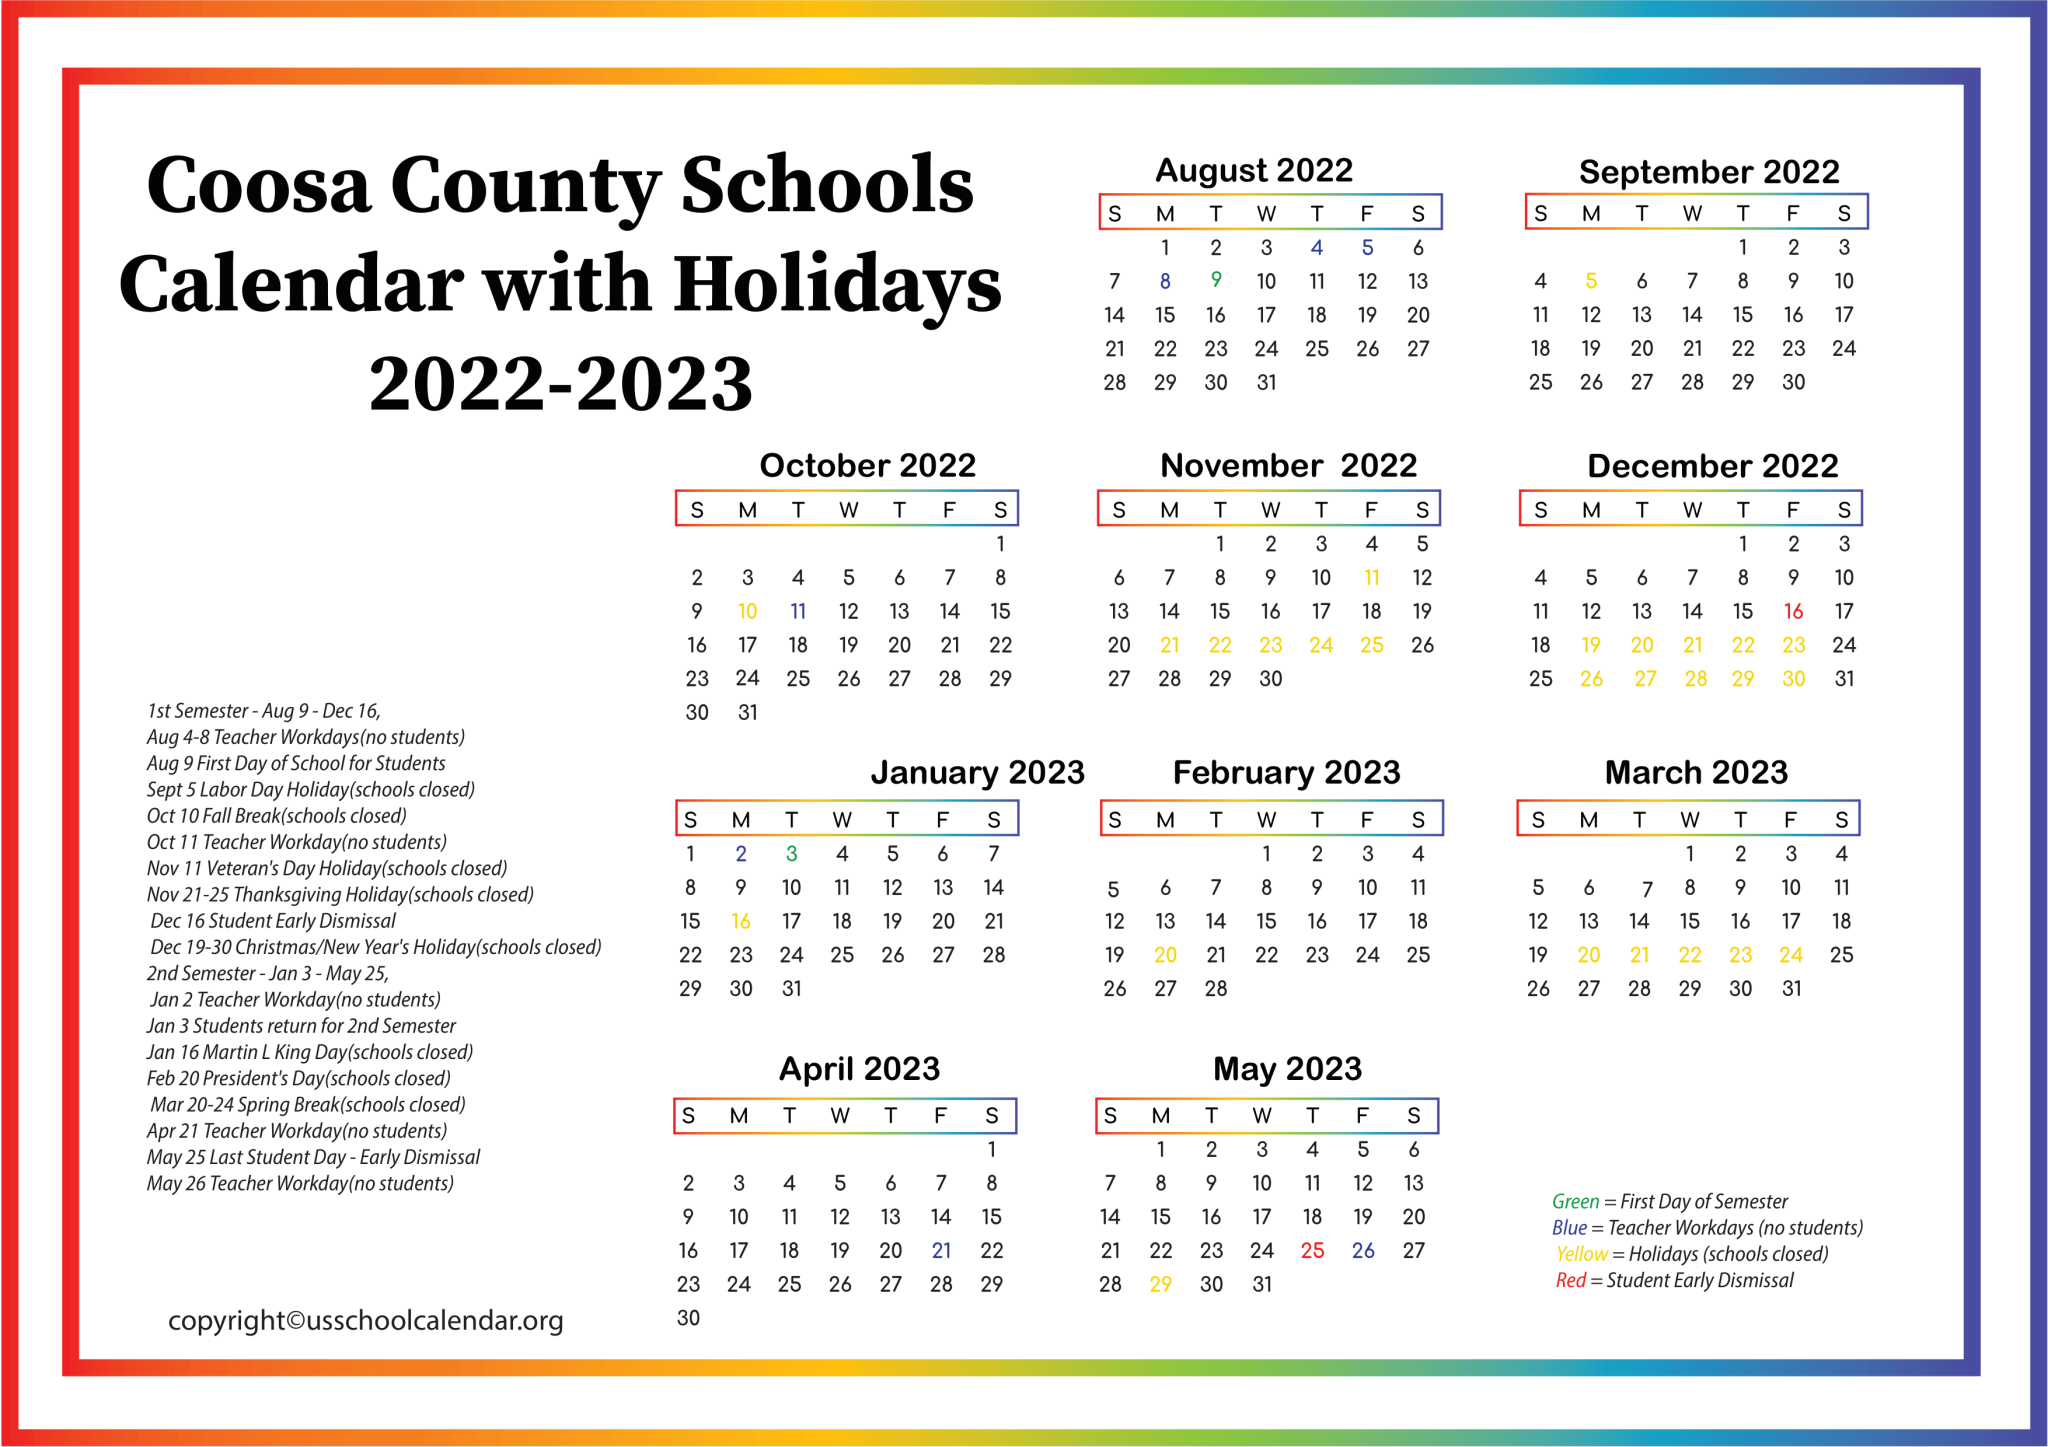 Coosa County Schools Calendar with Holidays 2023